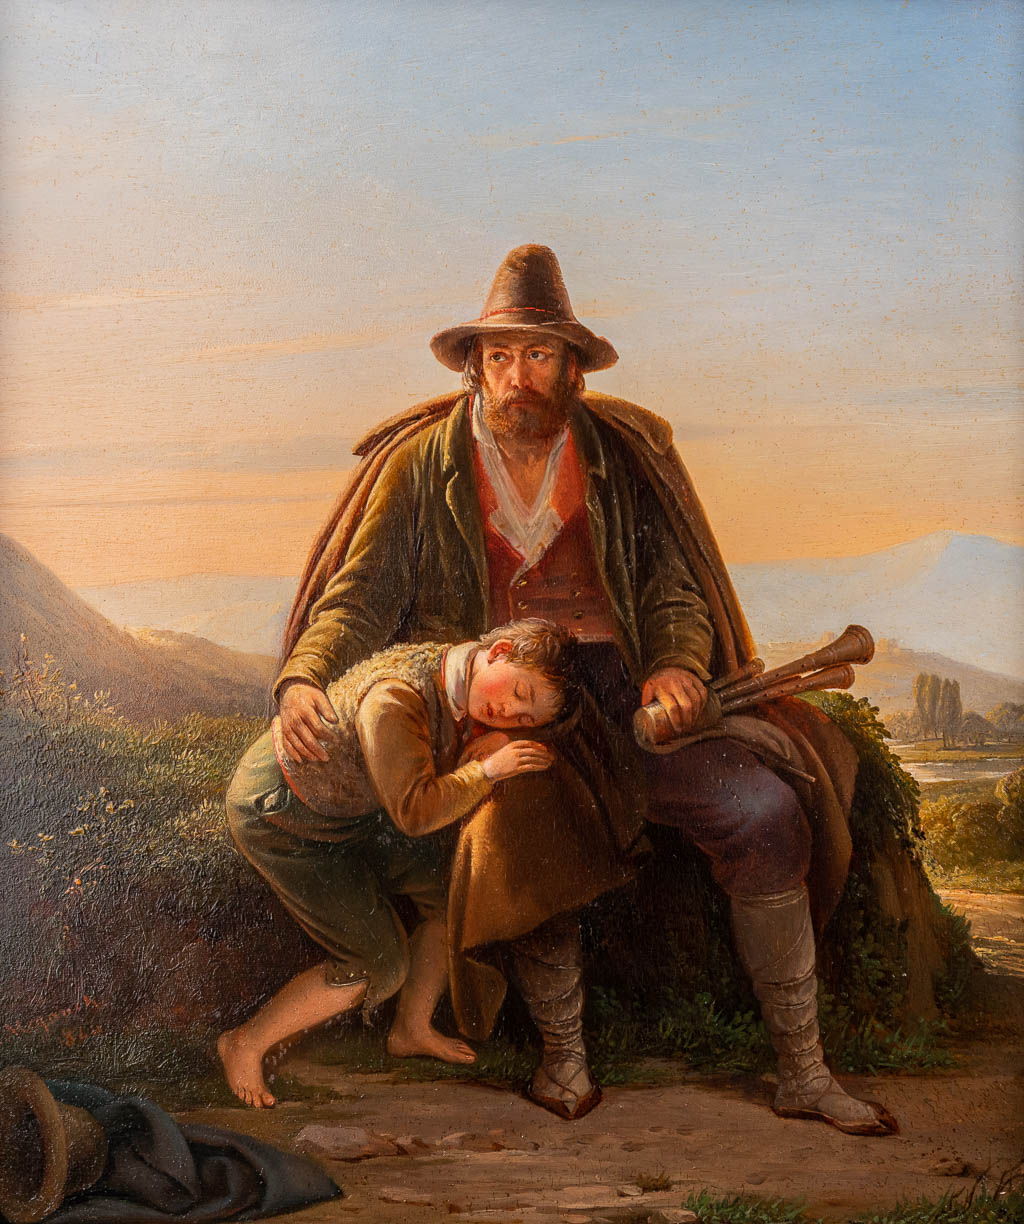 Joseph MEGANCK (1807-1891) 'Father and child in a mountain landscape' oil on panel. 1844 (W:22,5 x H:26,5 cm)